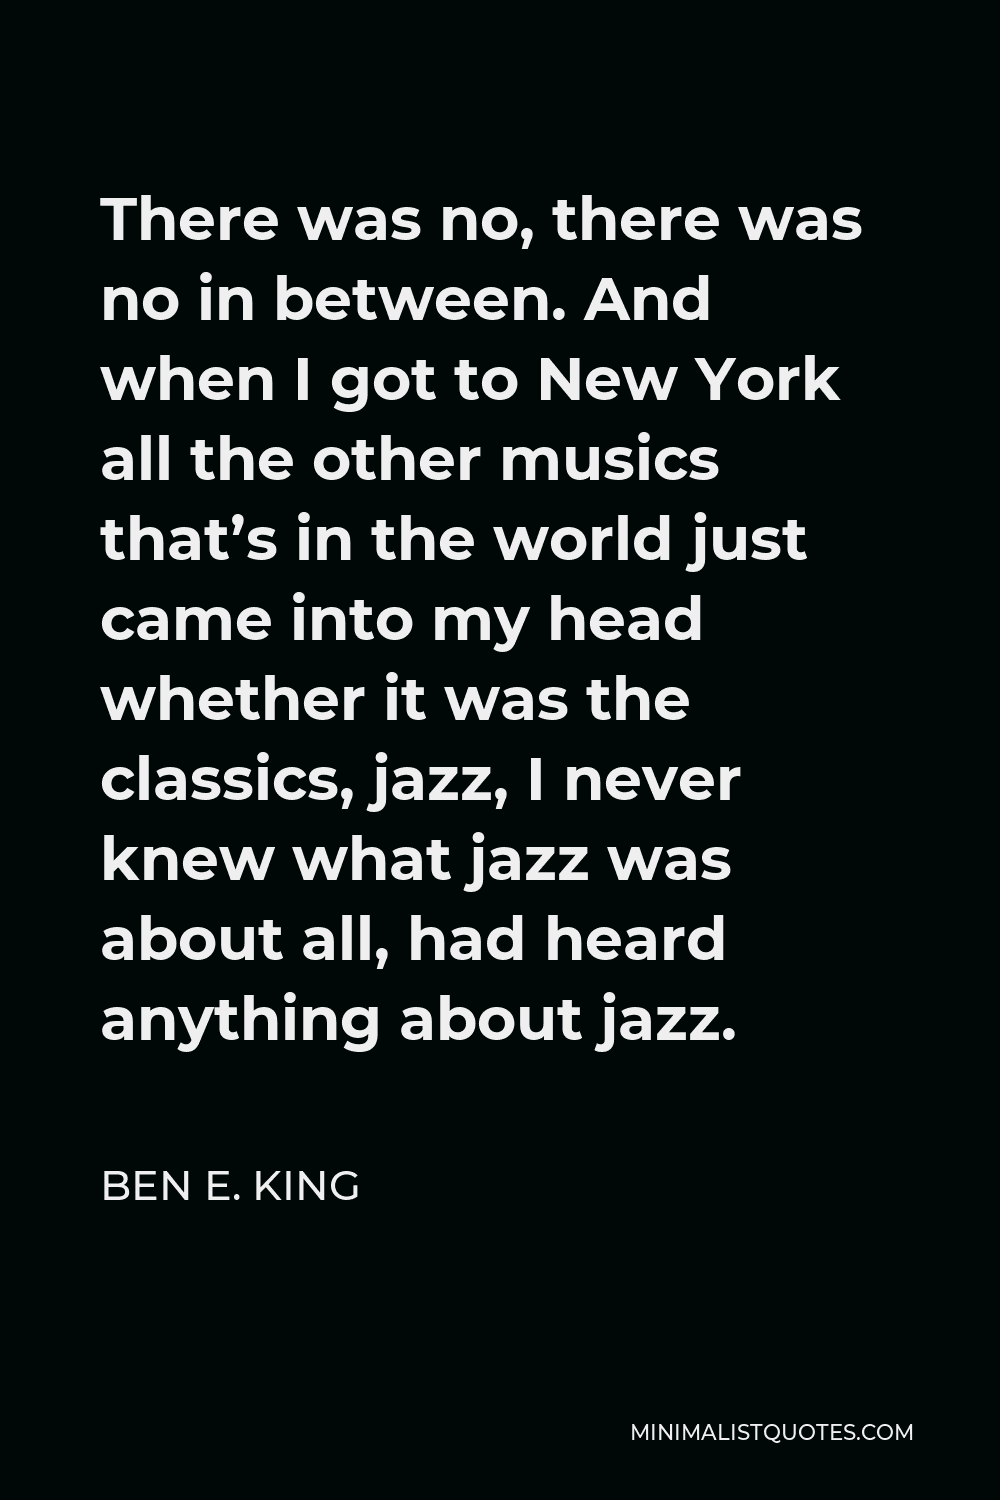 Ben E. King Quote - There was no, there was no in between. And when I got to New York all the other musics that’s in the world just came into my head whether it was the classics, jazz, I never knew what jazz was about all, had heard anything about jazz.